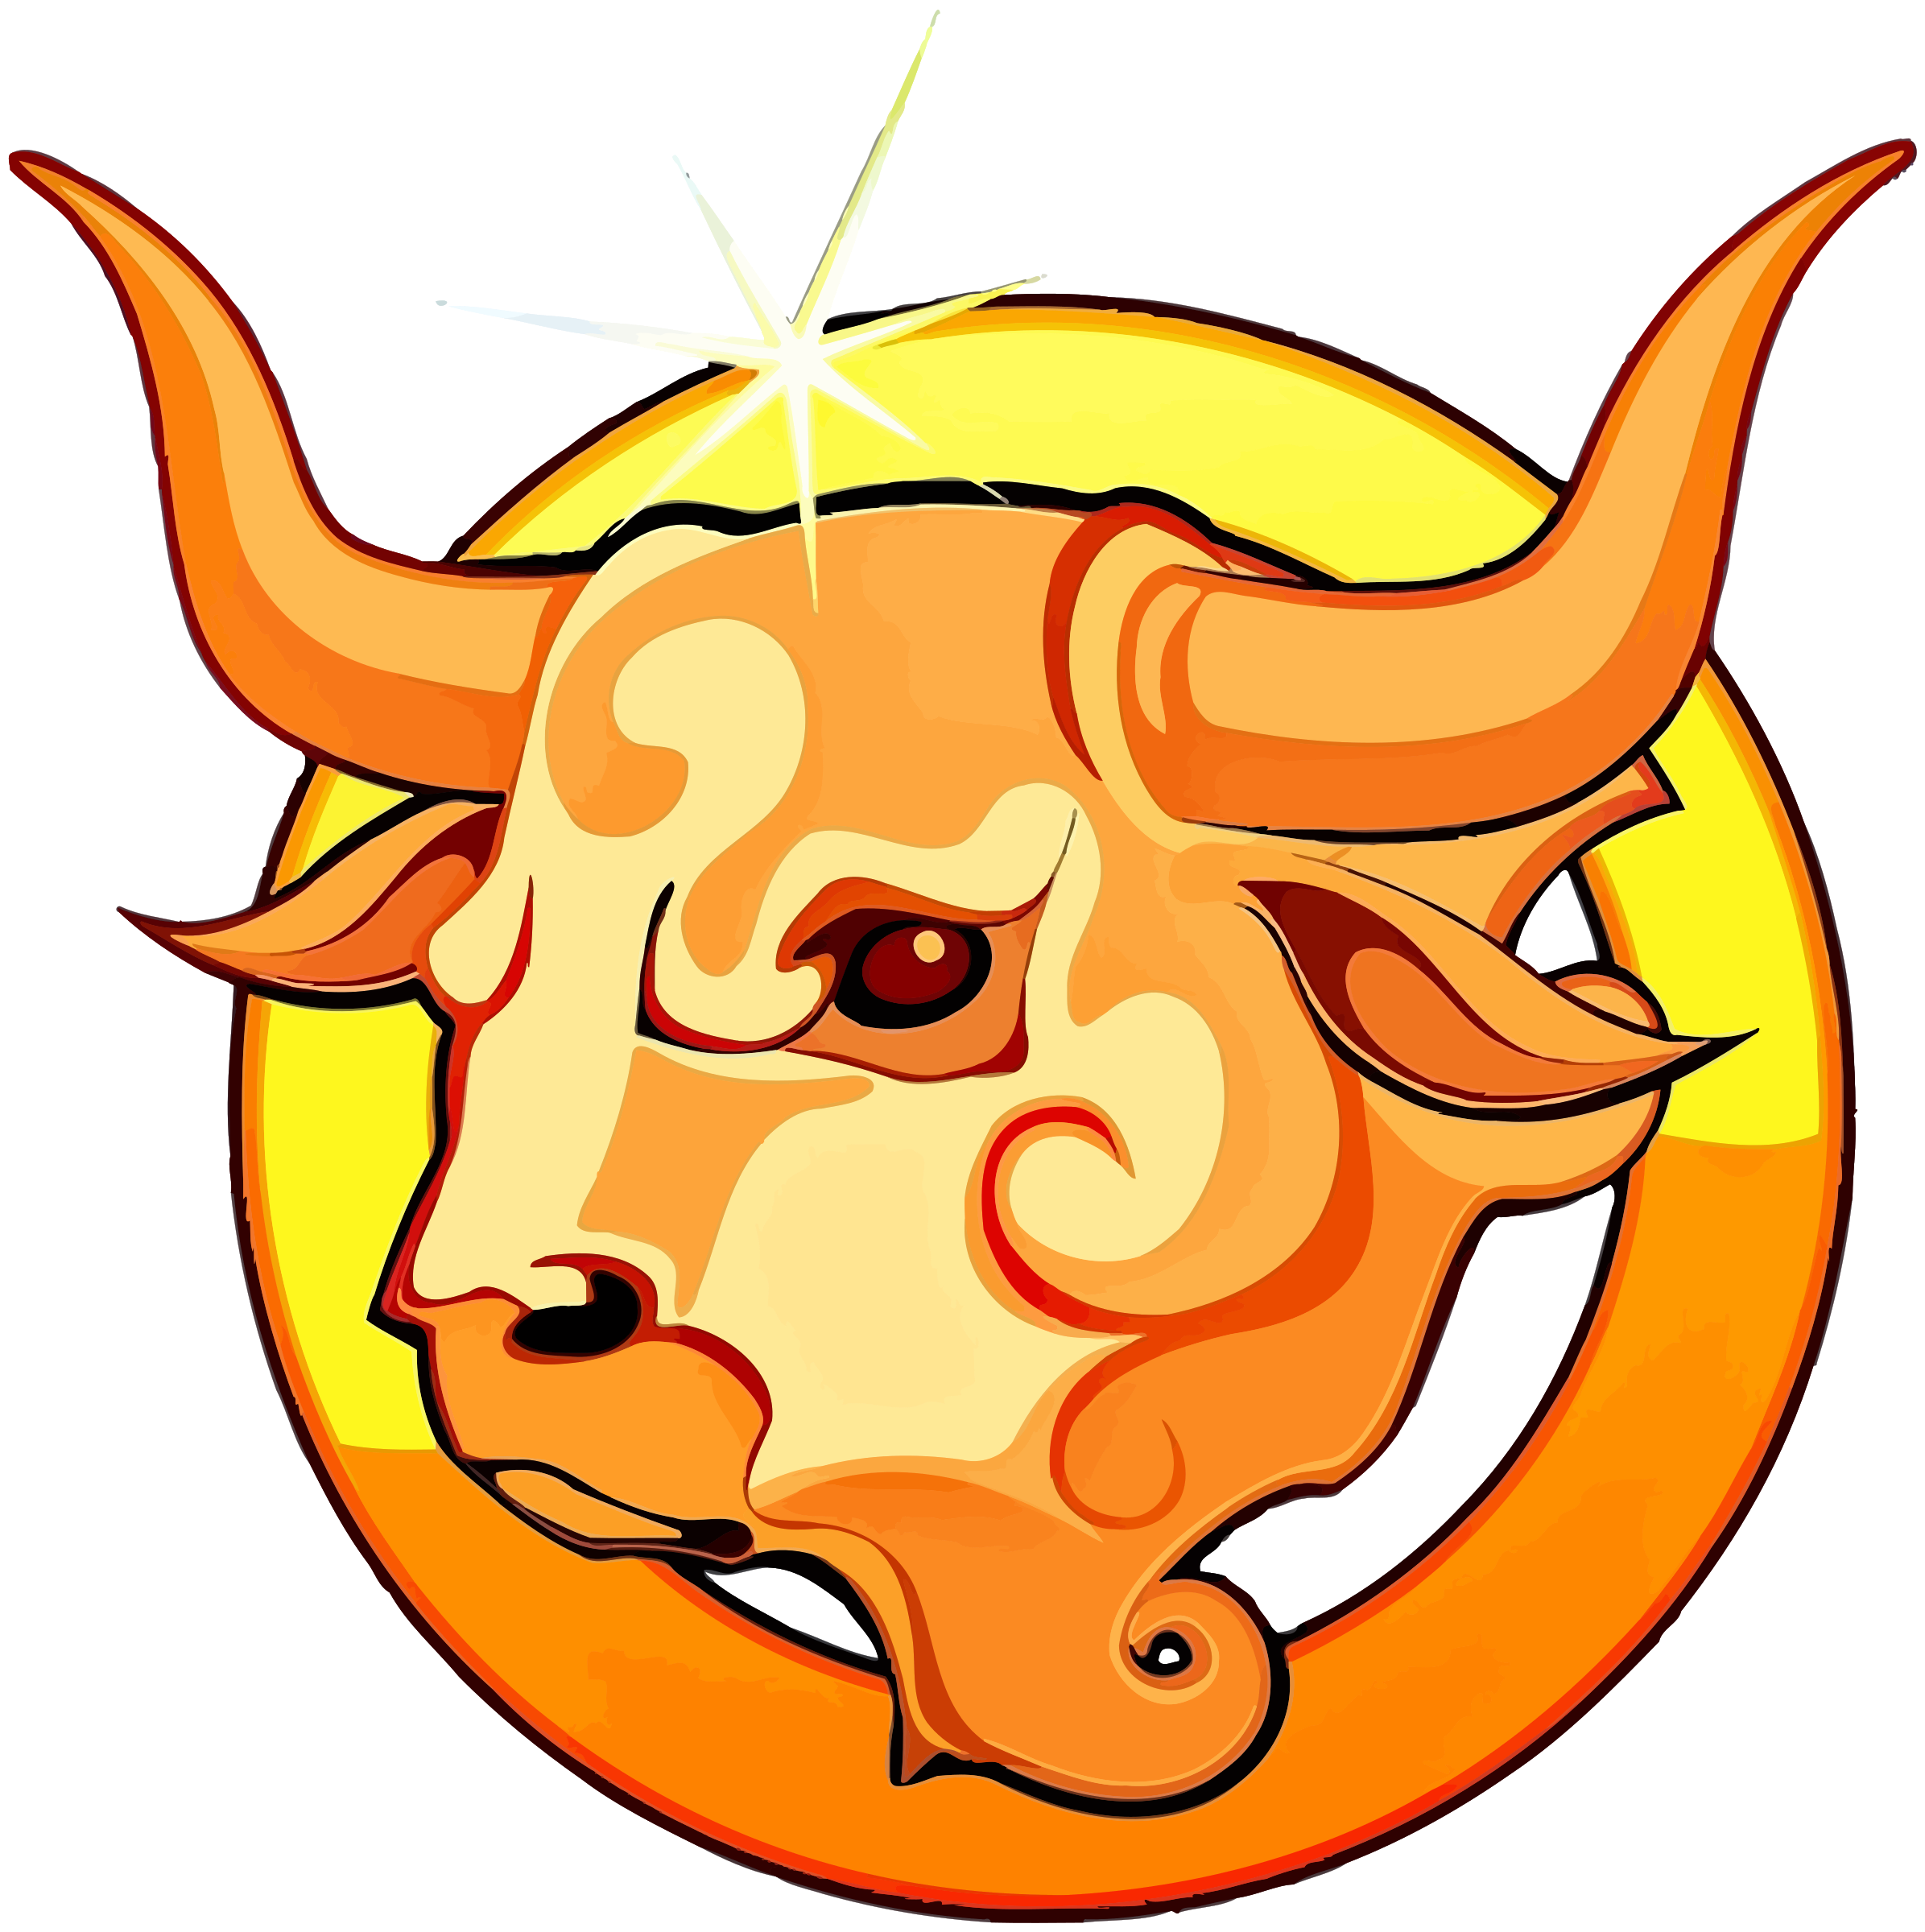 Taurus PNG Image with Transparent Background